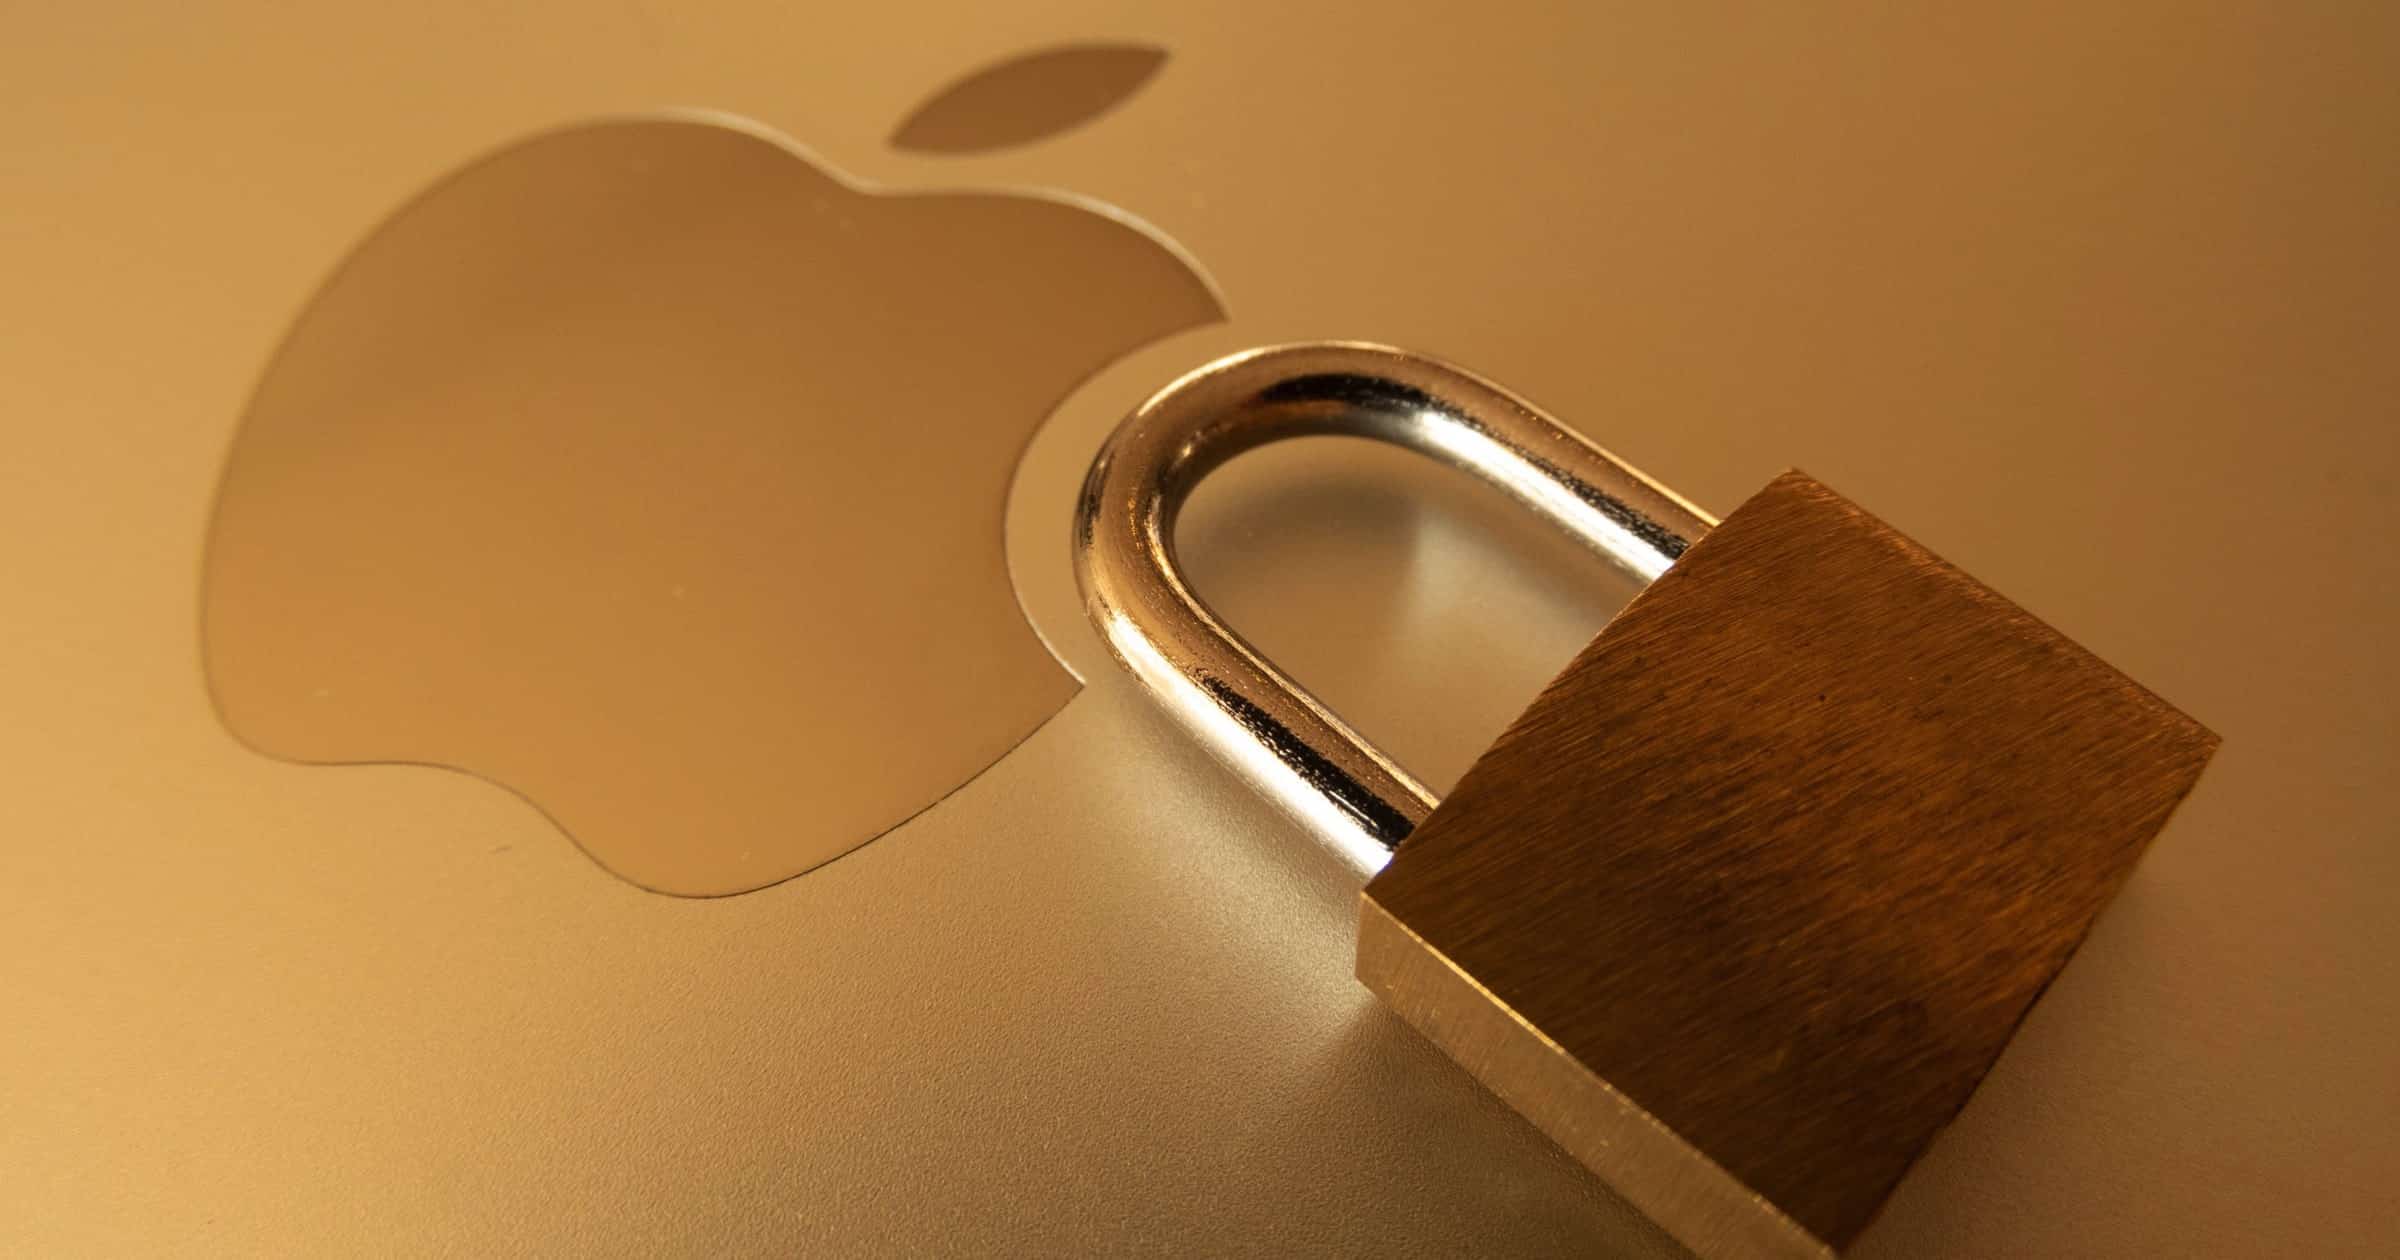 Security Researchers are Fed Up With Apple’s Bug Bounty Program